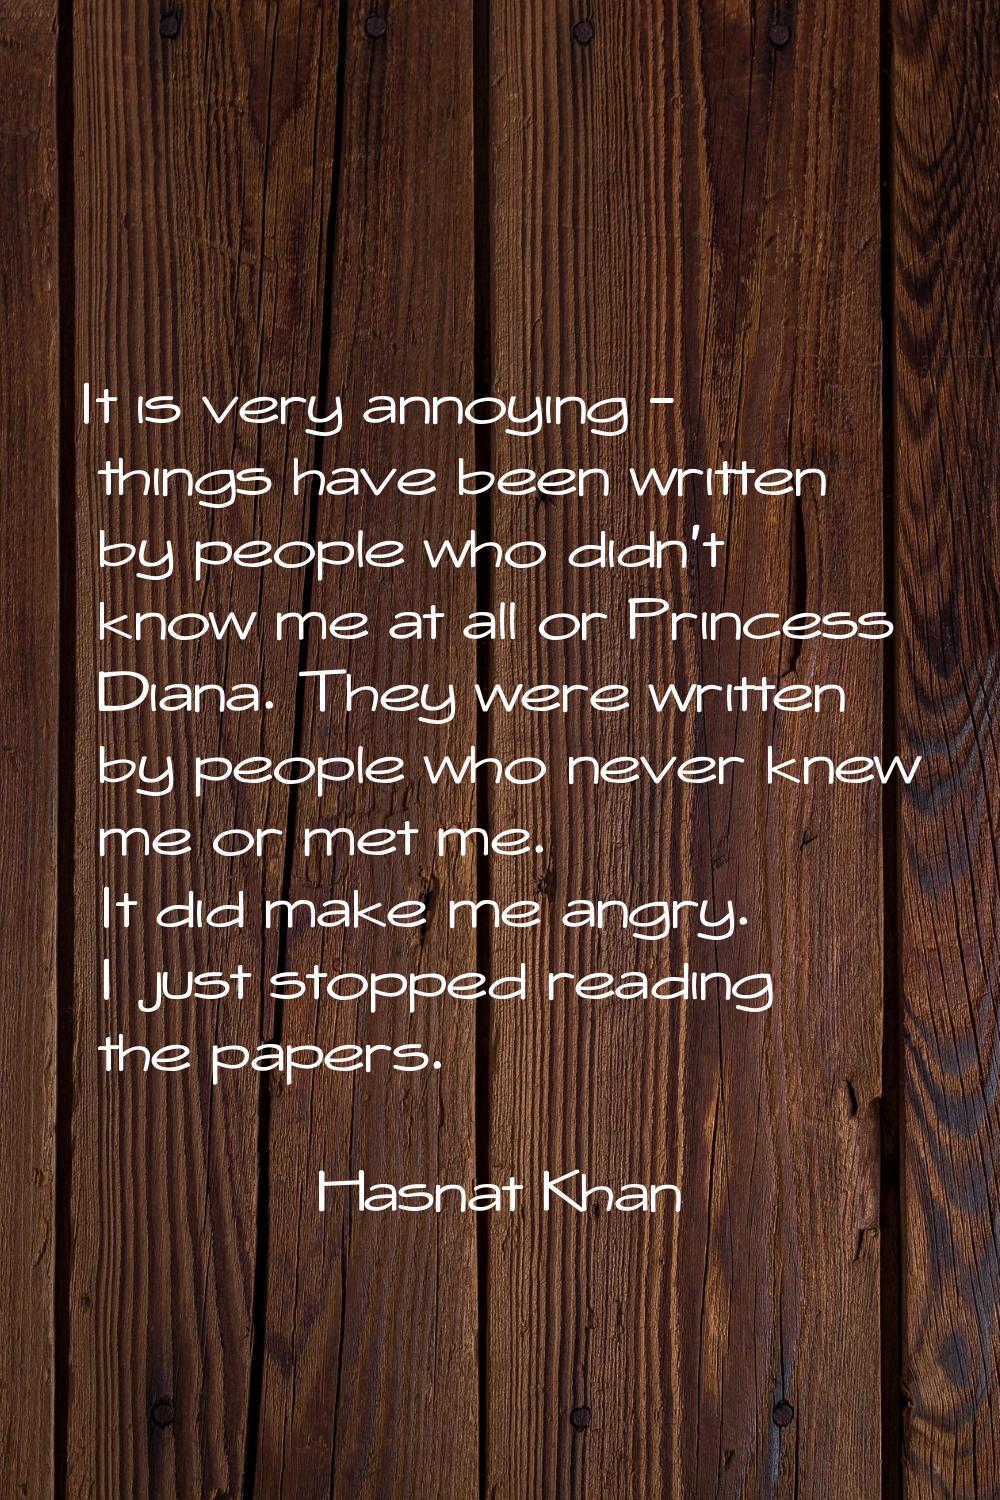 It is very annoying - things have been written by people who didn't know me at all or Princess Dian